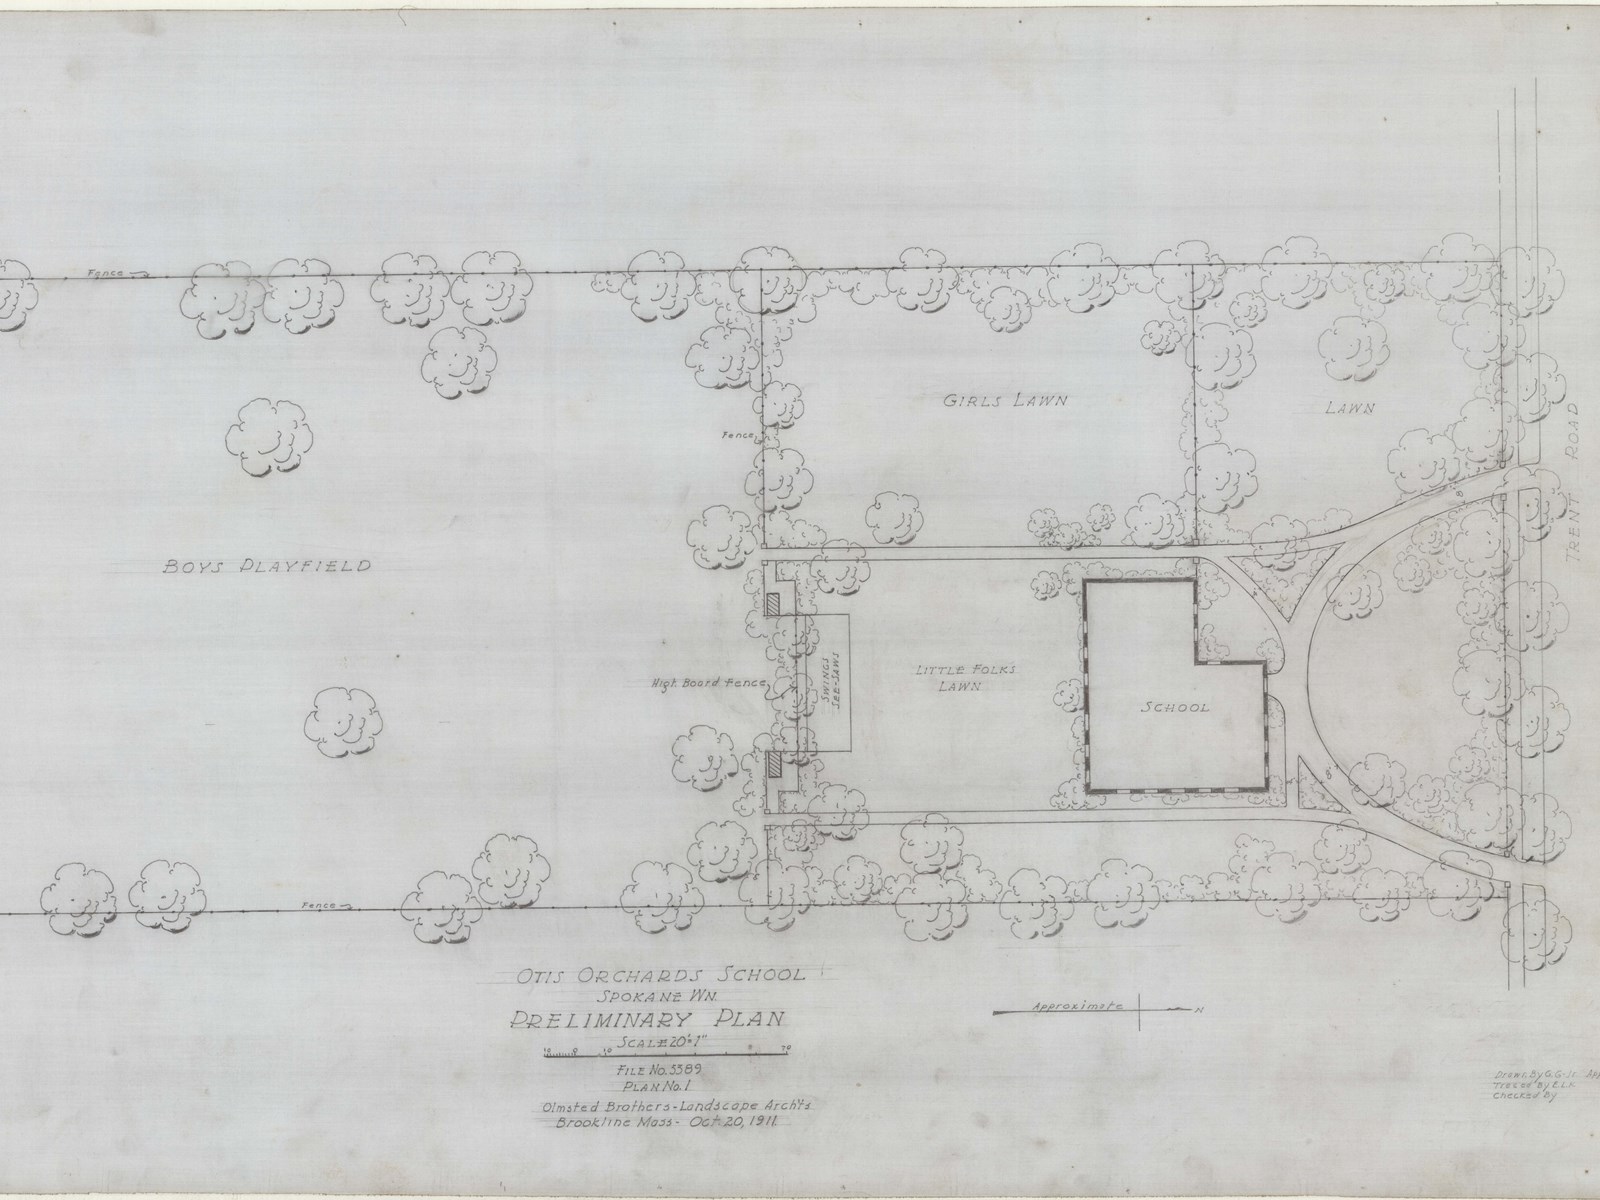 Pencil plan of rectangular landscape with school building, several rectangular lawns, trees on edges